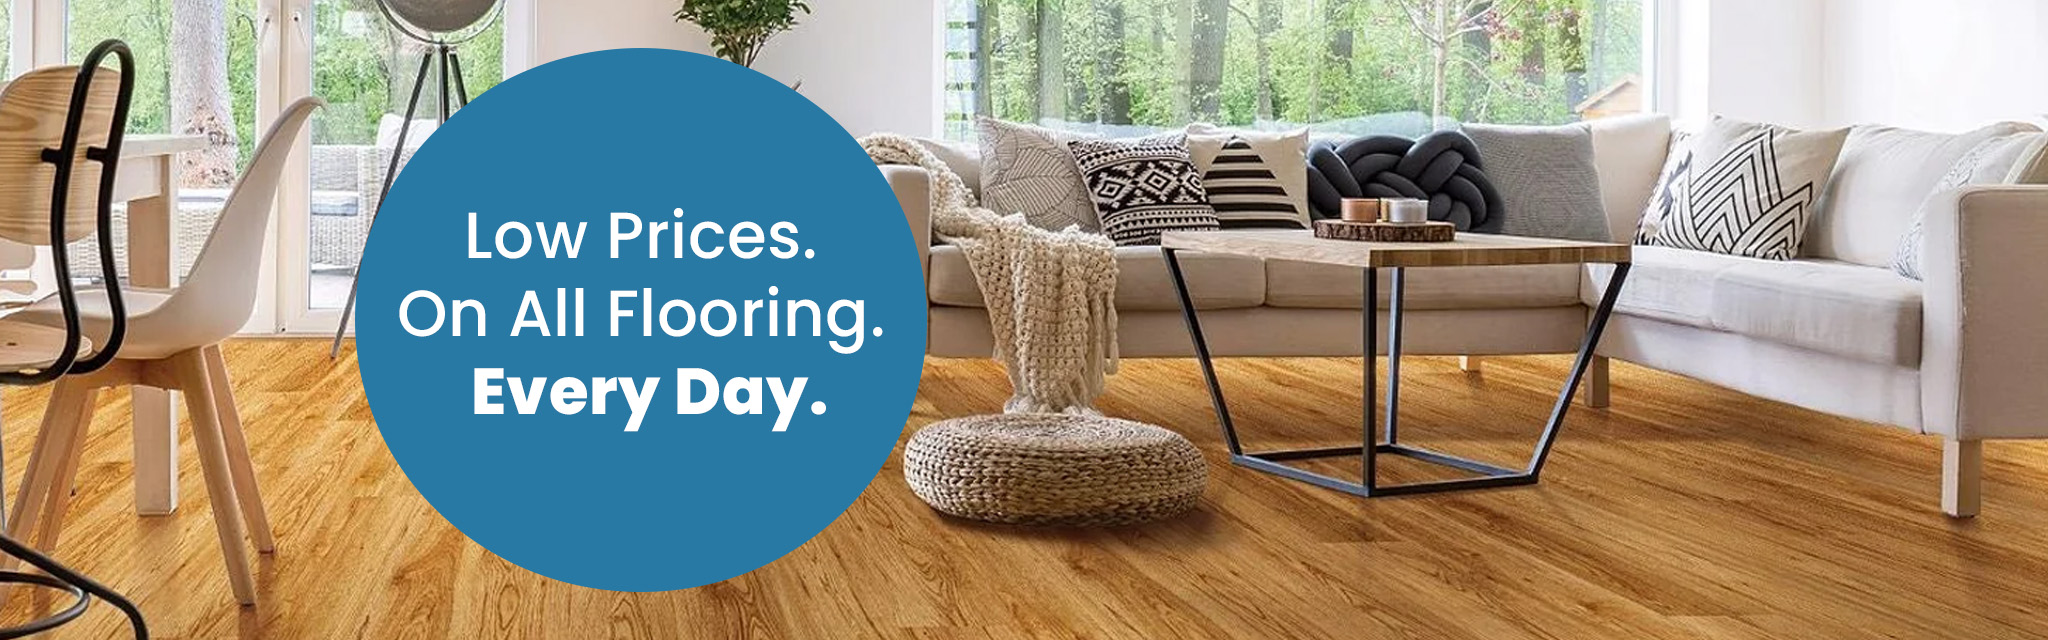 Low Prices On All Flooring Every Day